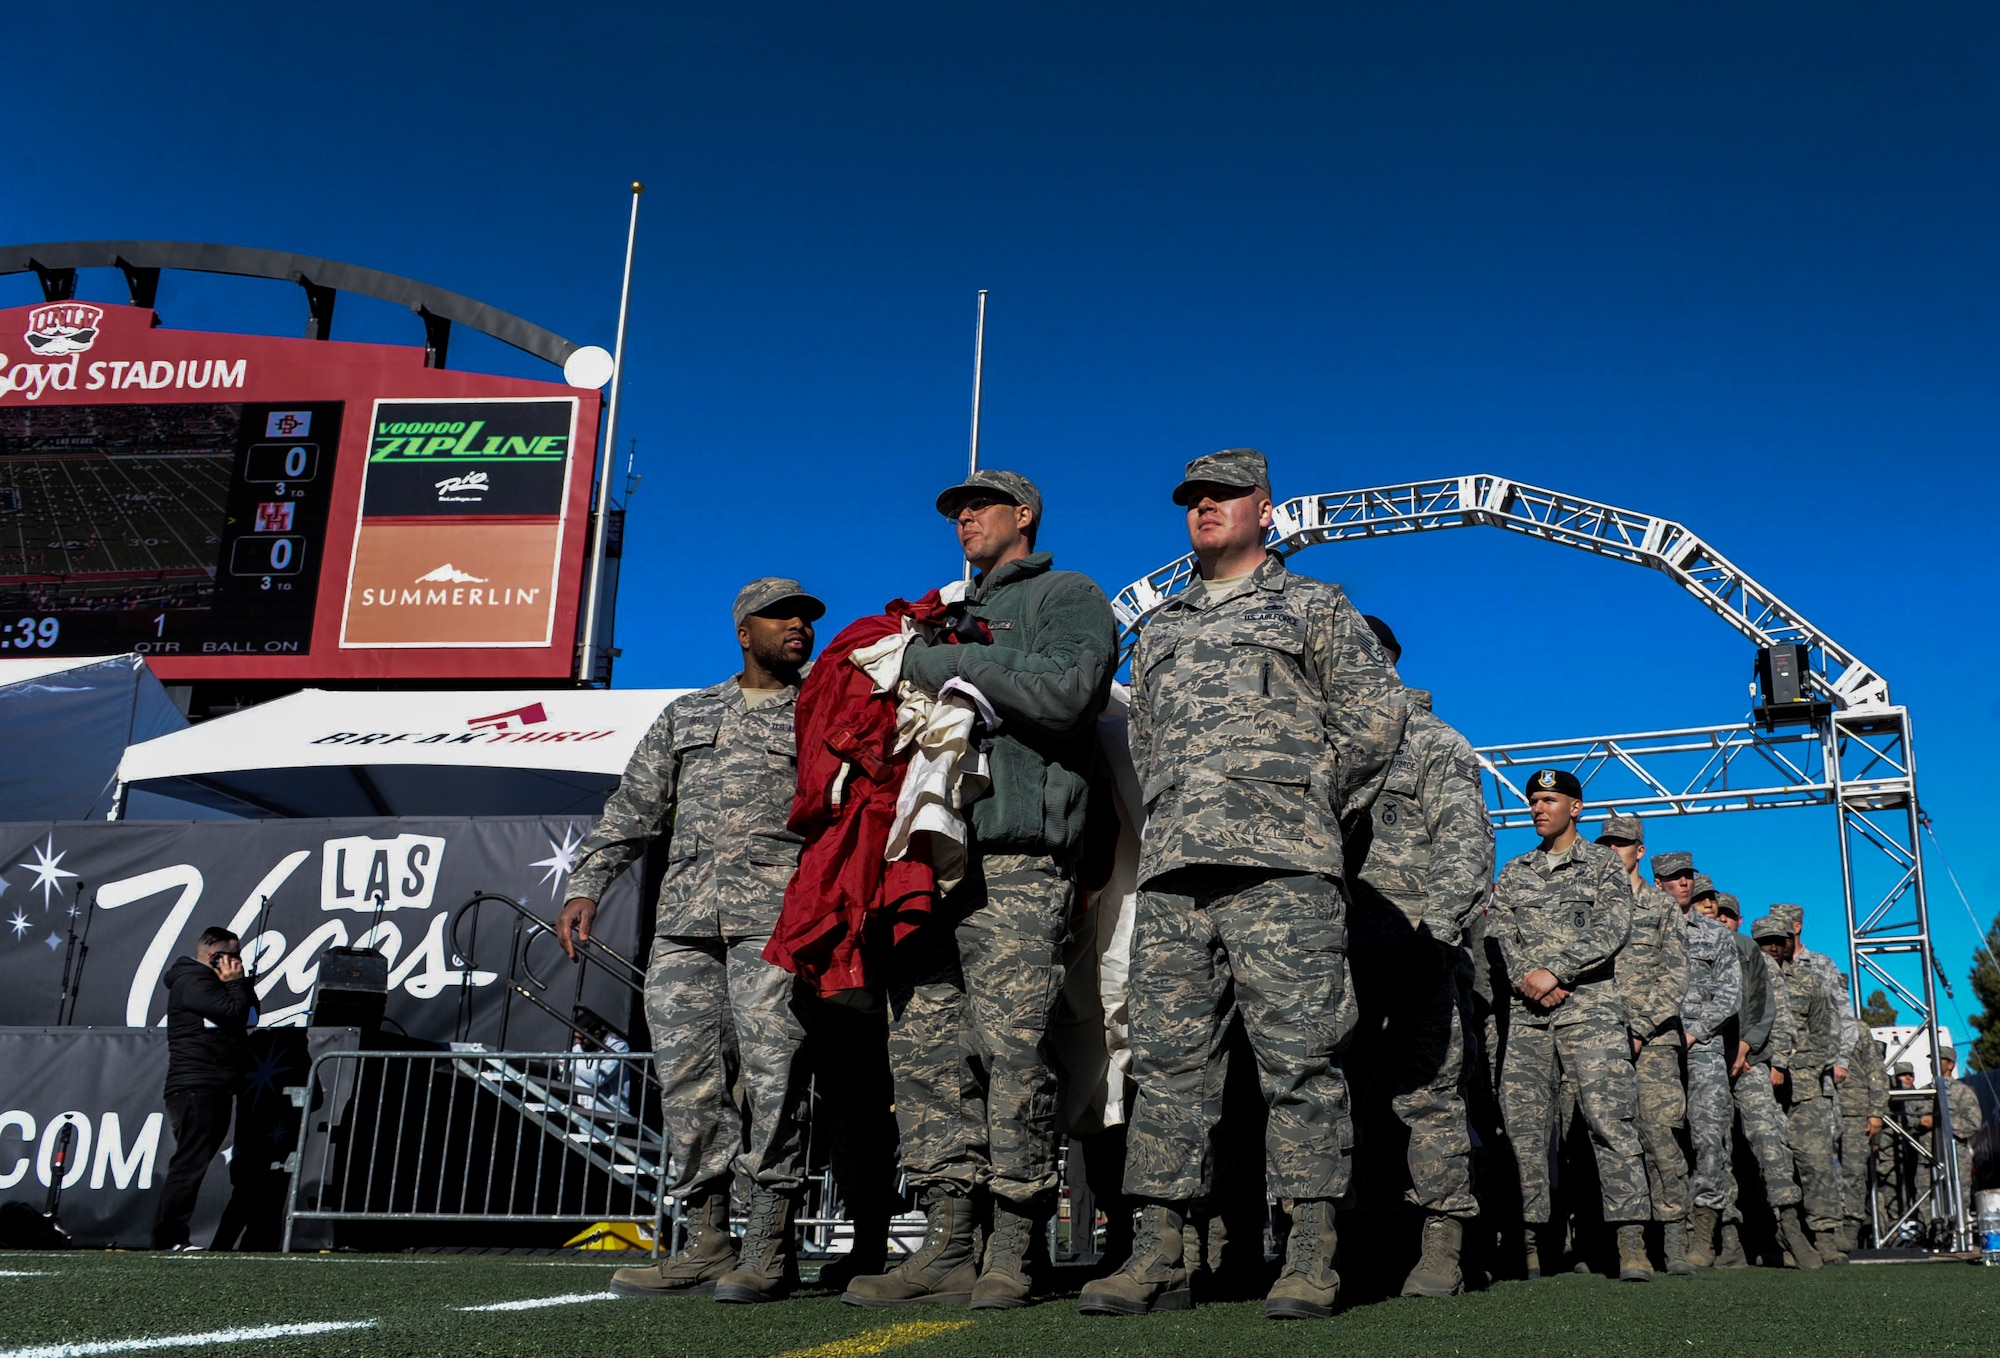 Airmen from Nellis and Creech Air Force Bases wait to step onto the field at Sam Boyd Stadium and unveil a large American flag during the Las Vegas Bowl, Dec. 17, 2016. This year’s game marked the 25th Anniversary of the city of Las Vegas hosting the bowl game. (U.S. Air Force photo by Airman 1st Class Kevin Tanenbaum/Released)